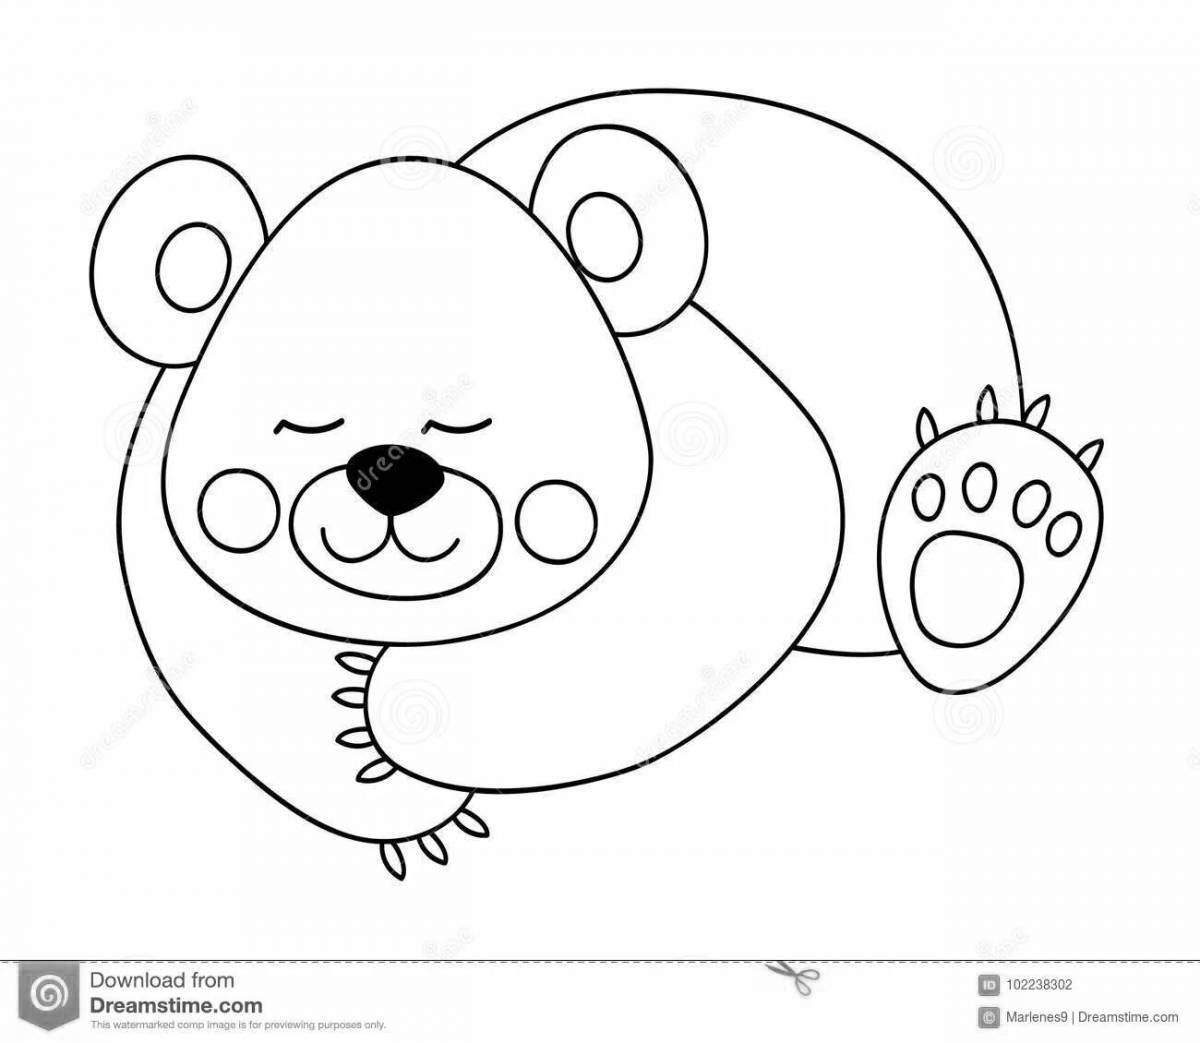 Delightful bear den coloring book for 3-4 year olds